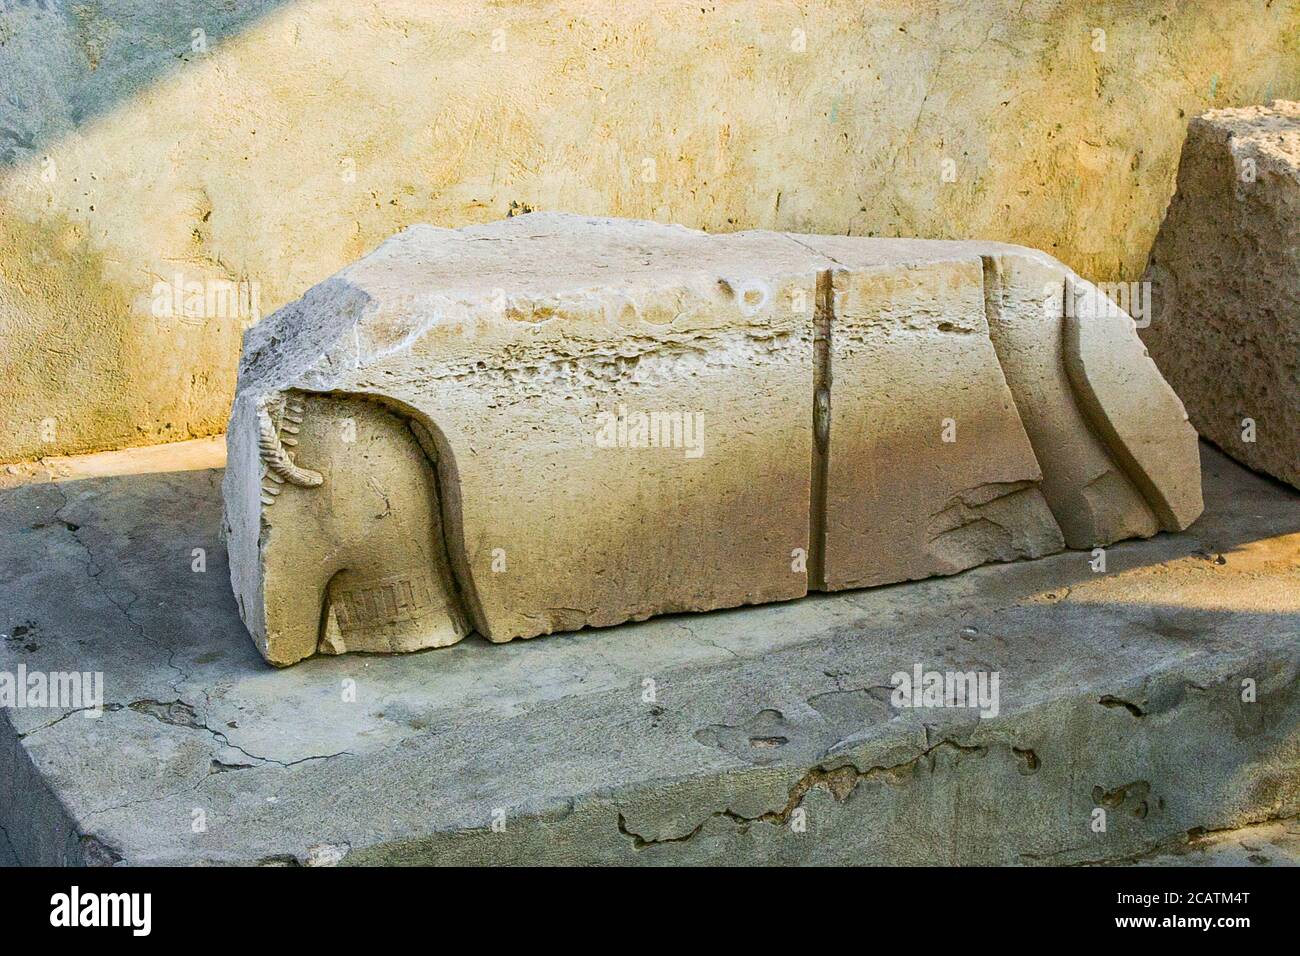 Egypt, Nile Delta, Tanis, artifacts displayed near the mission house : Sunk relief. Stock Photo